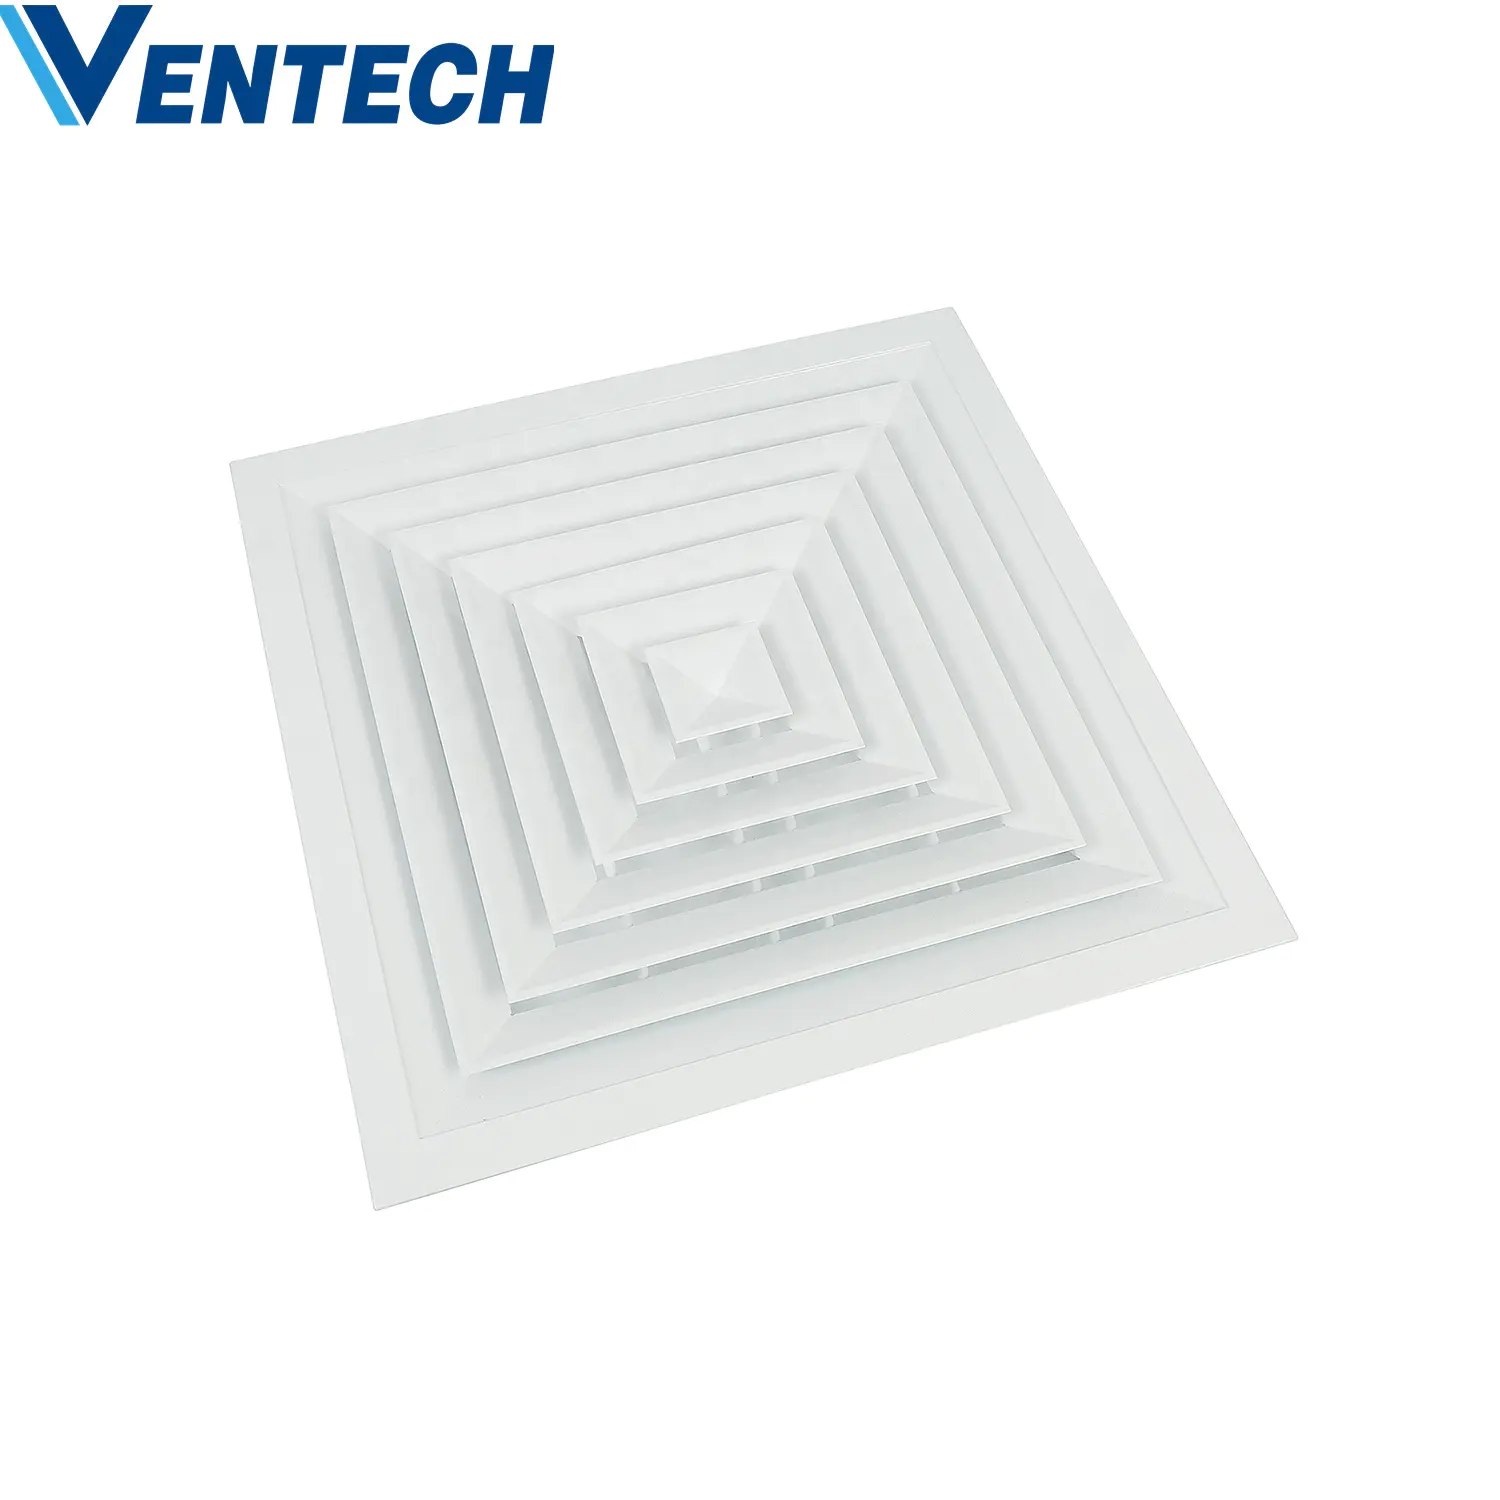 Hvac System VENTECH Aluminum 4-way Supply Air Duct Vent Square Ceiling Air Diffusers